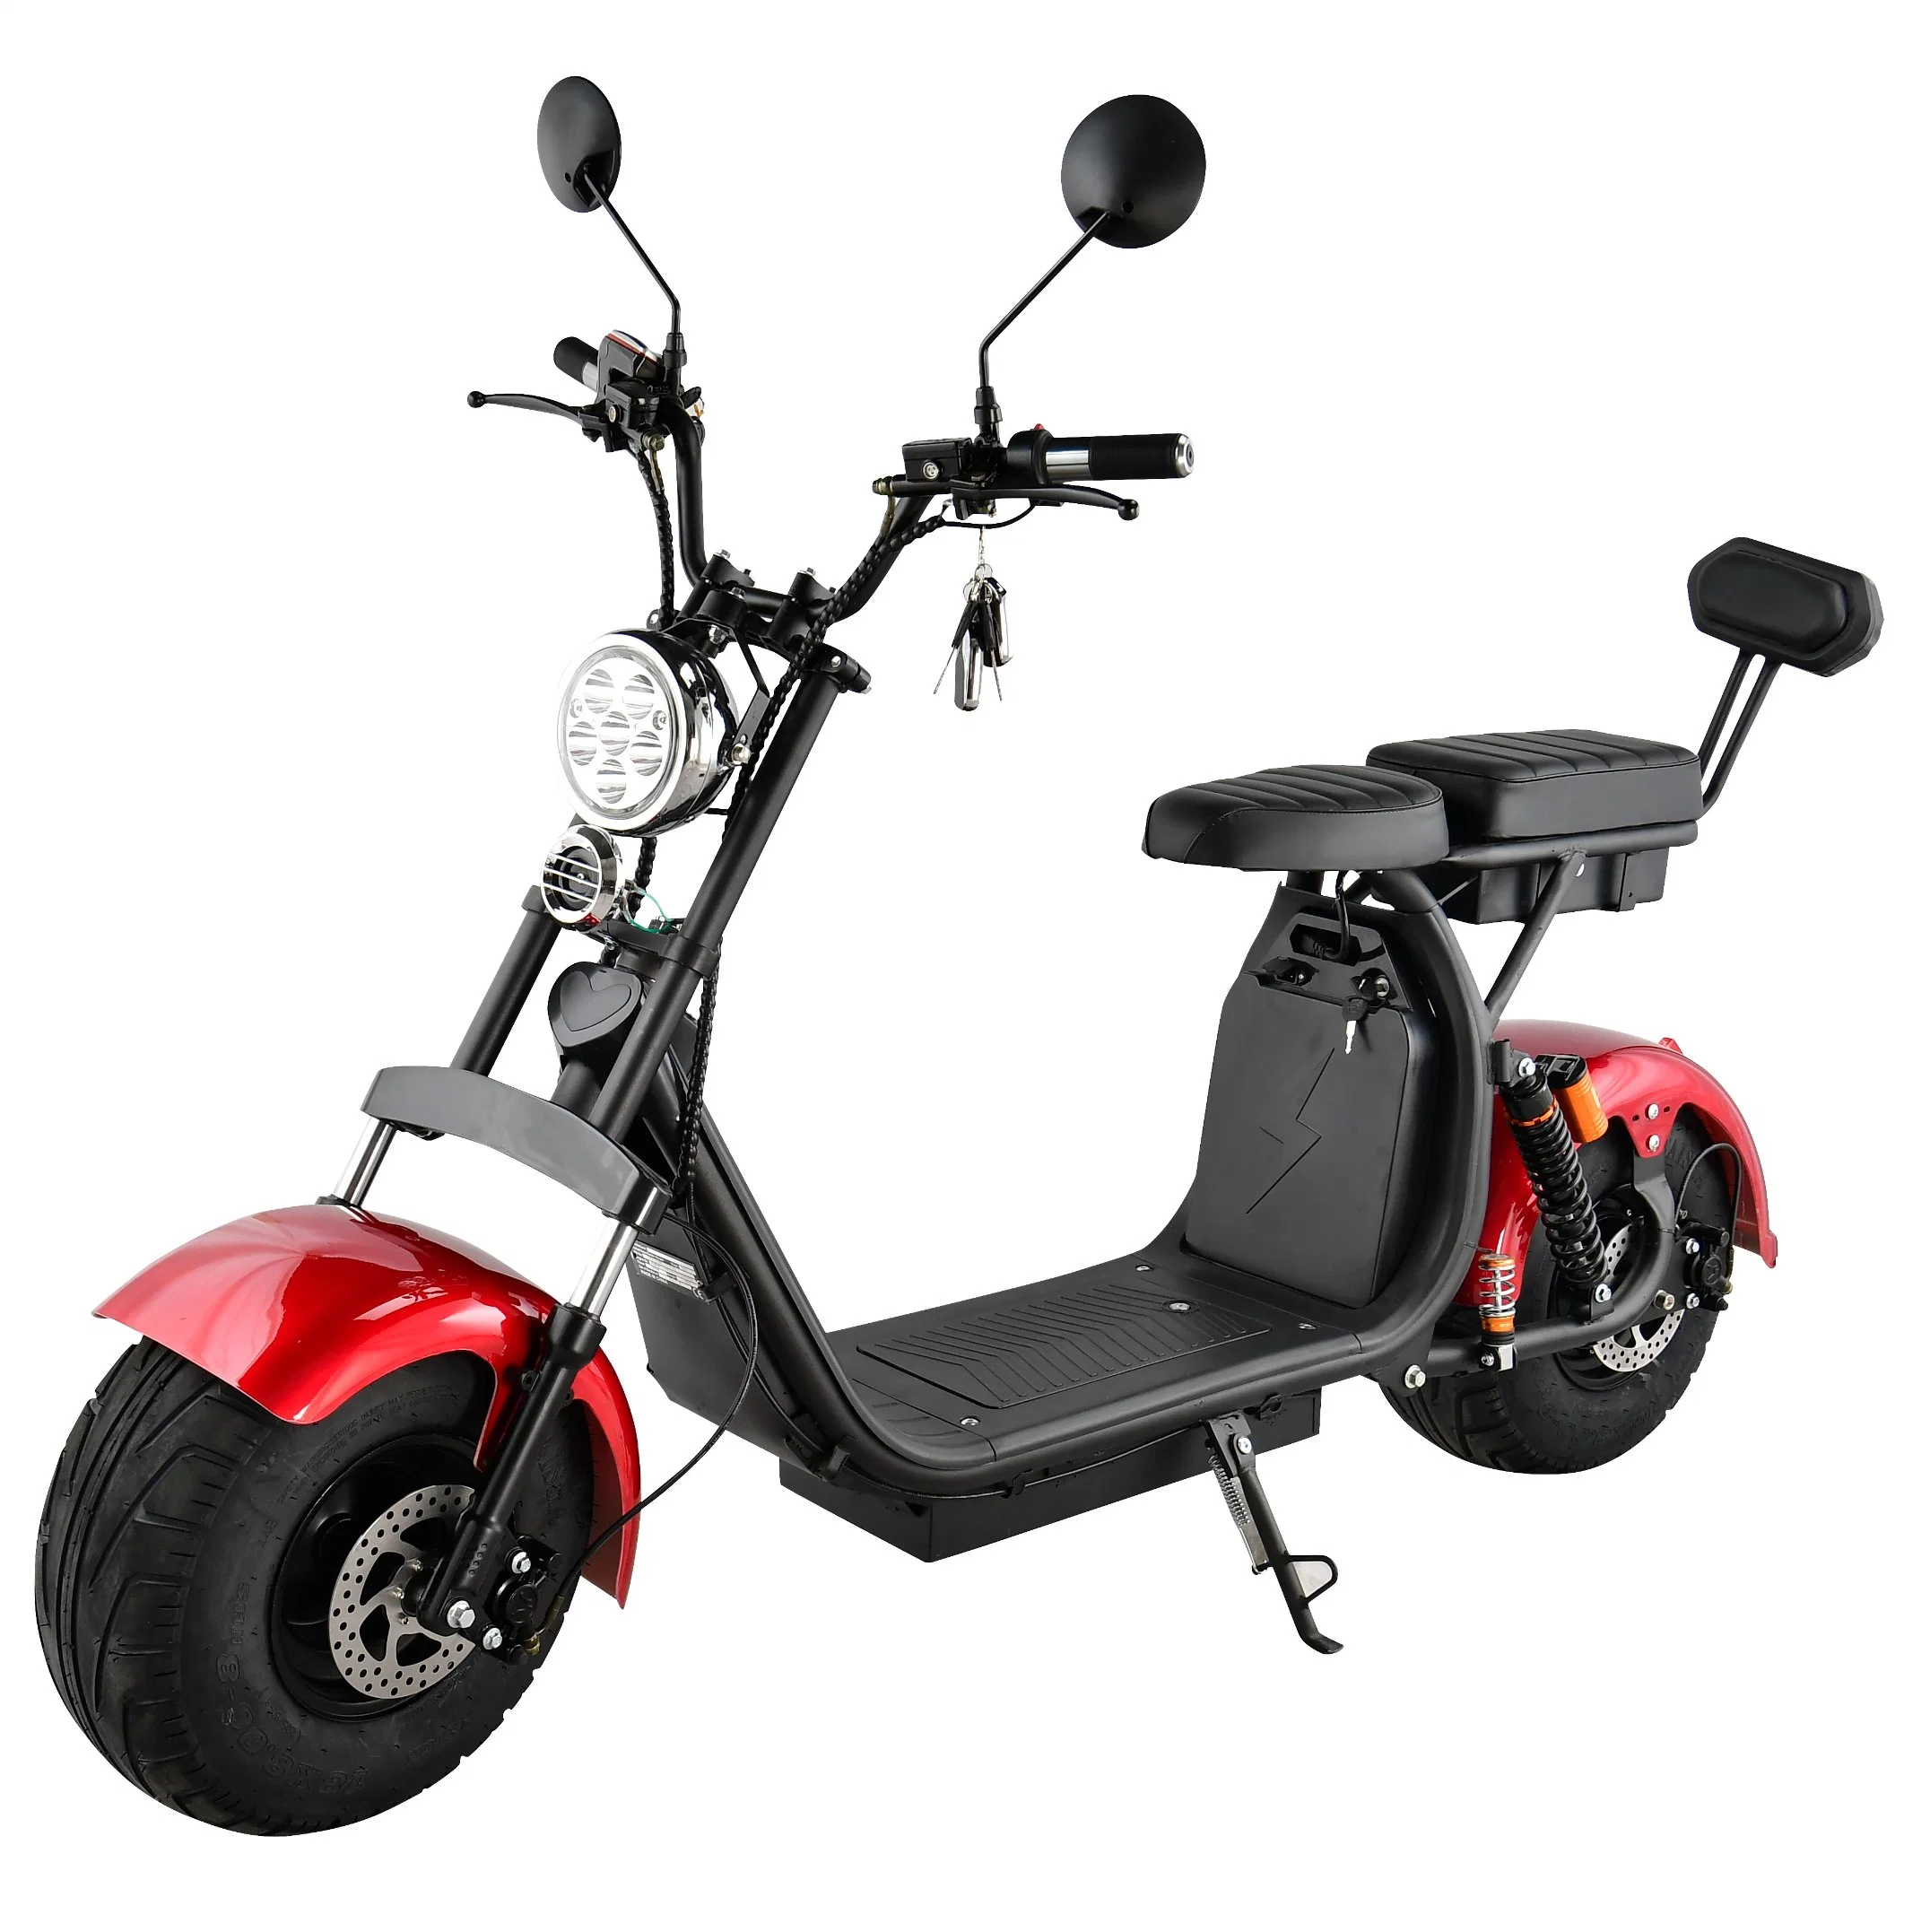 EEC/Coc Electric Mobility Bike Scooter Folding Motor Electric Scooter